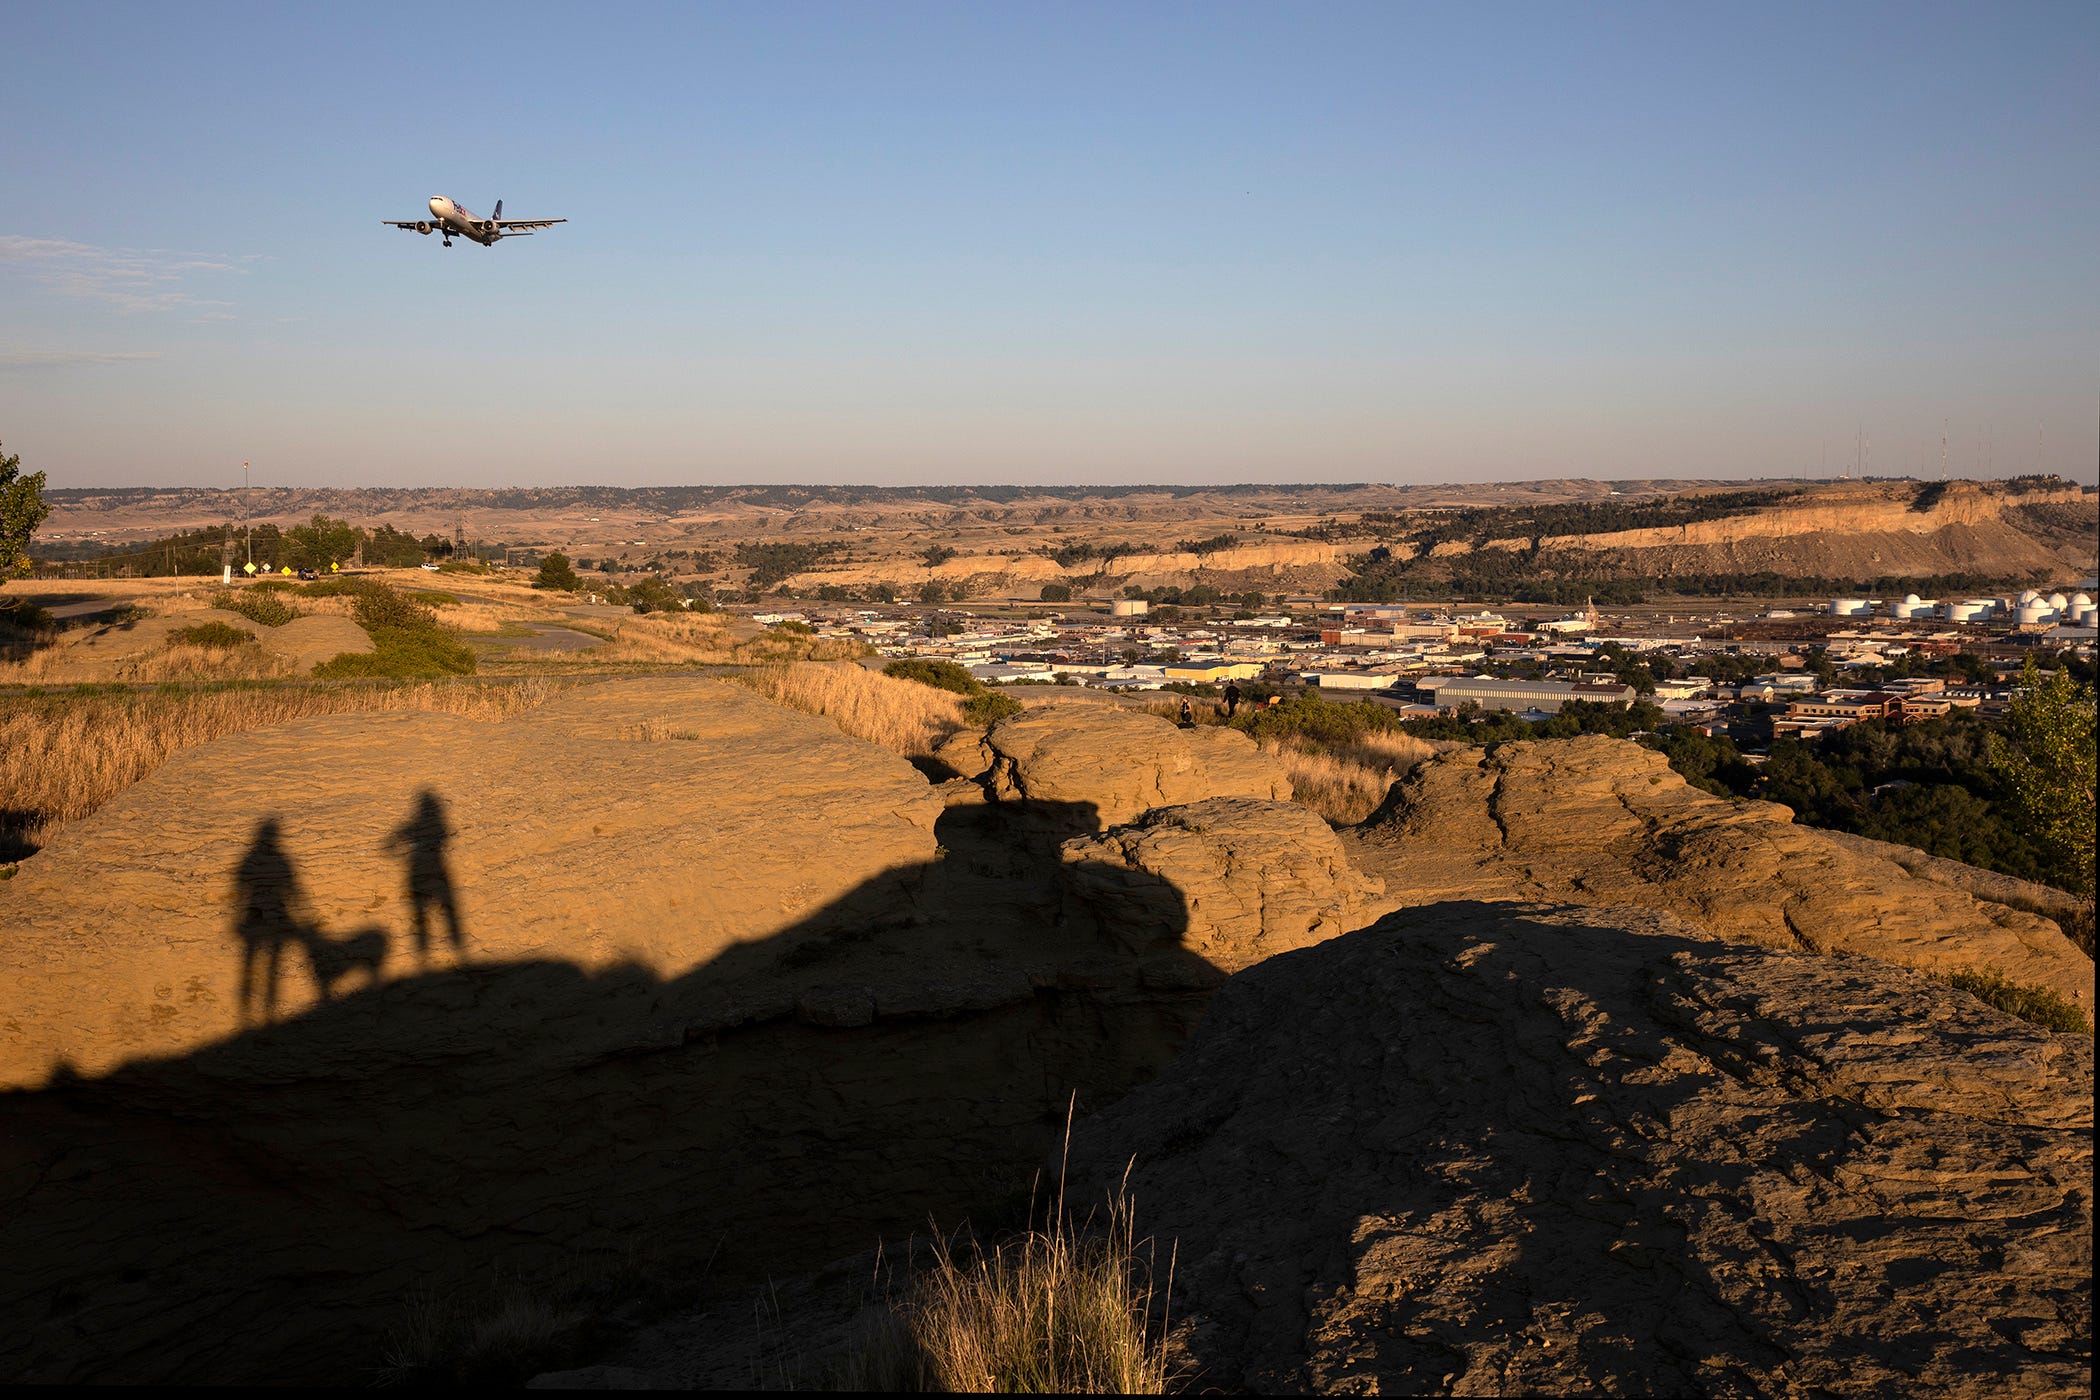 A plane flies over orange rocks that have the shadows of two people and a dog cast against them.